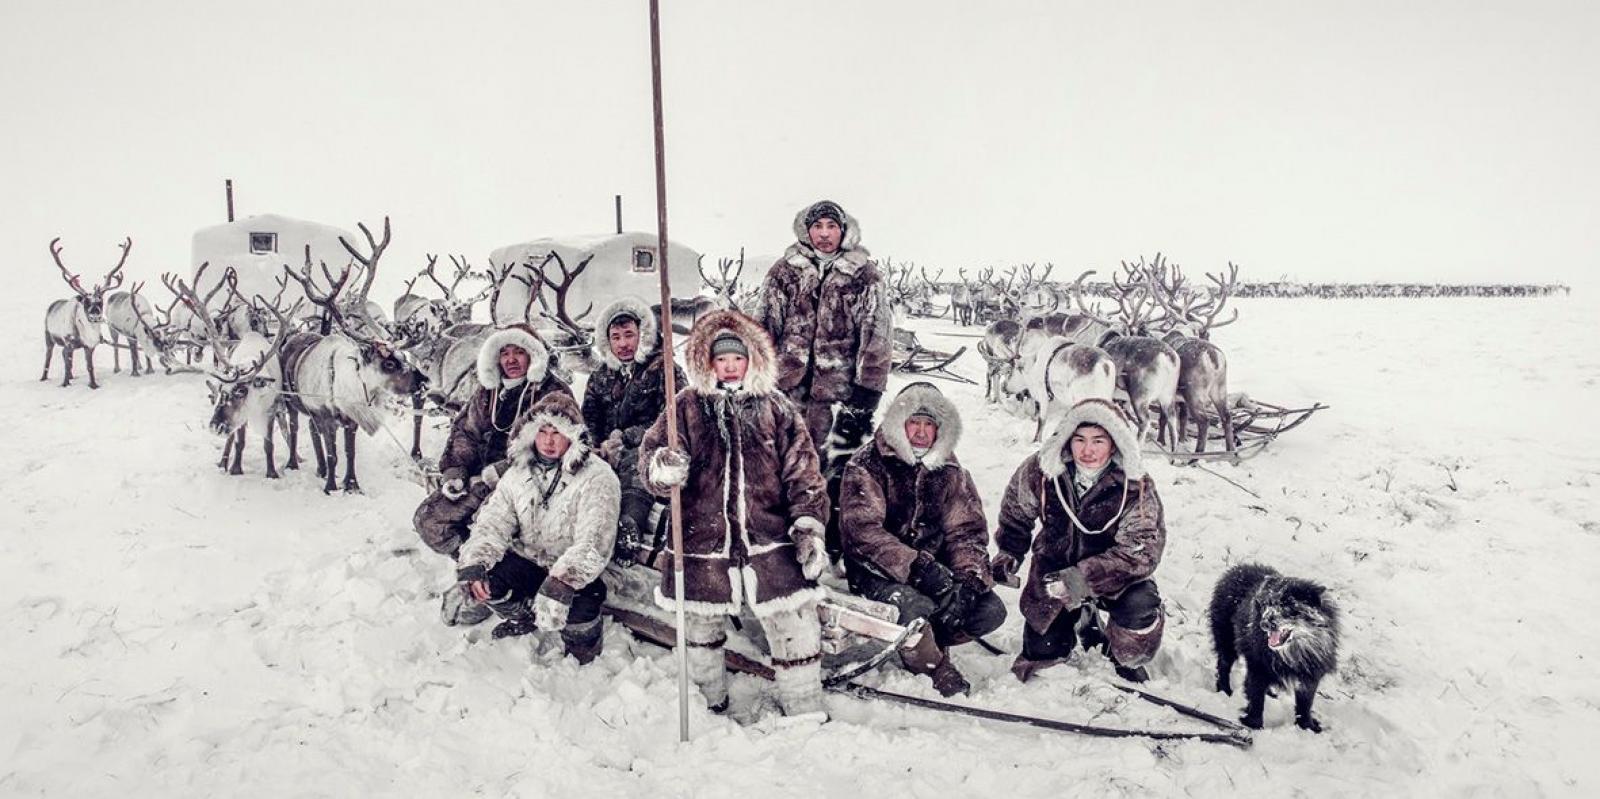 Brigade Migrating with the Bolaks, Dolgan, Anabar district, Yakutia, Siberia 2018

I’m determined to show the world how beautiful, it really is here – and that requires the magic of light.

All available sizes & editions for each size of this